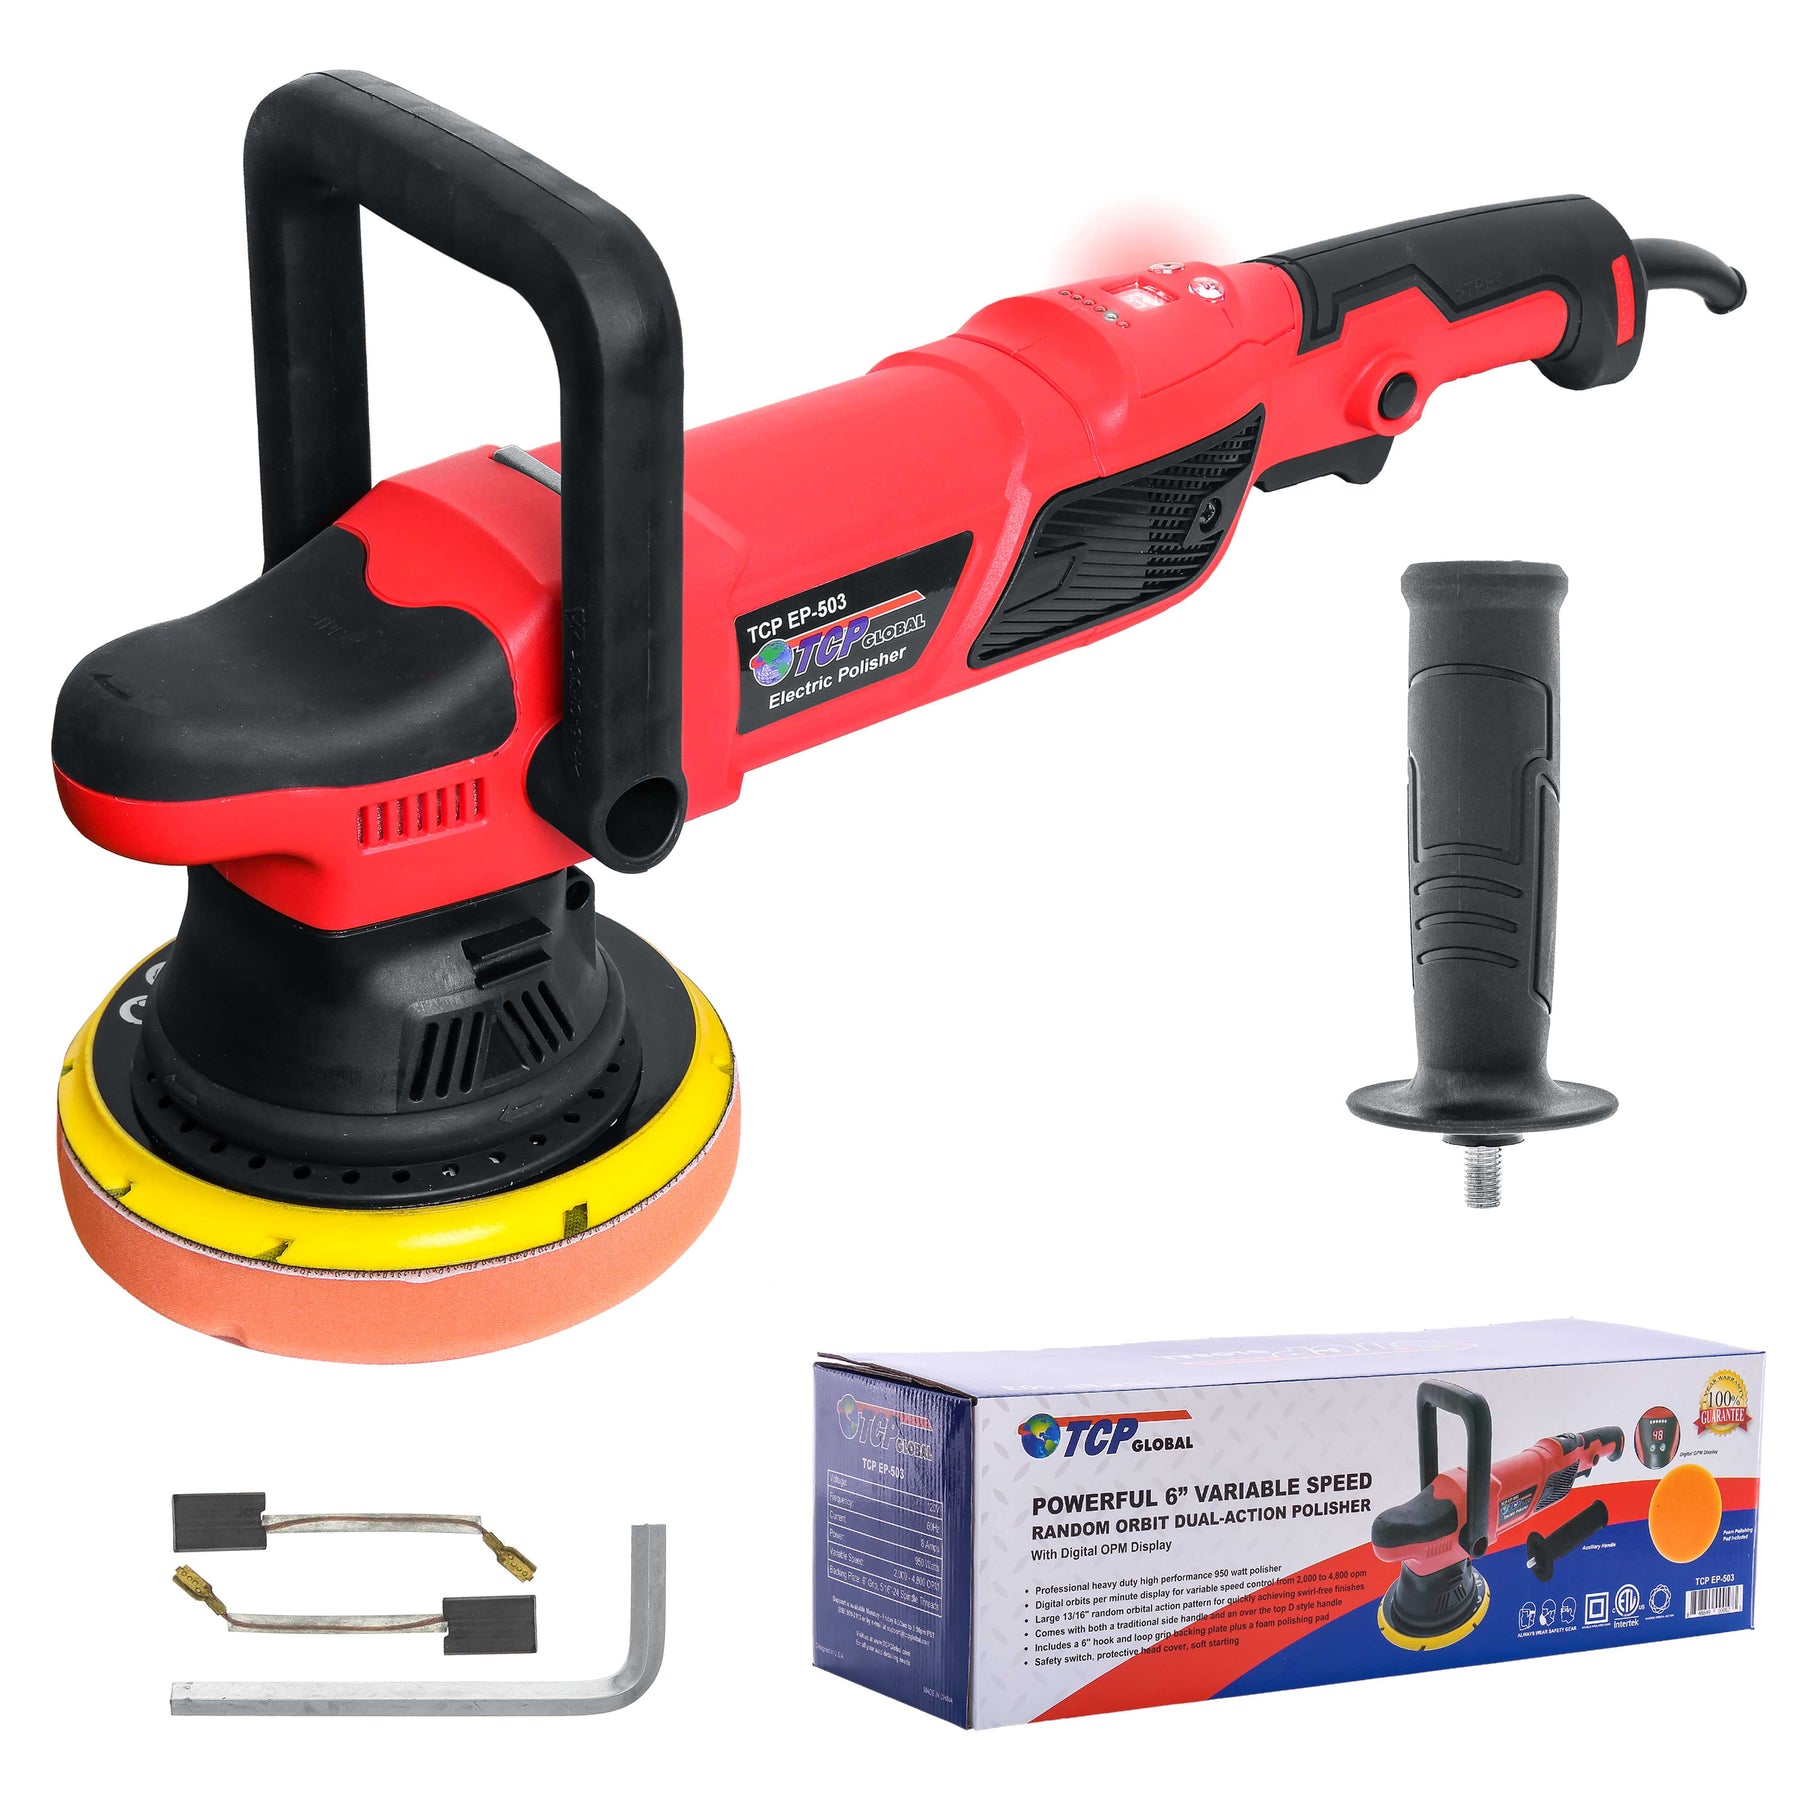  MAXXT Dual Action Polisher Random Orbital Buffer Polisher  for Car Detailing Polishing and Waxing Variable Speed 6 Inch 21MM Long  Throw Polisher Machine… (Red)  Review Analysis